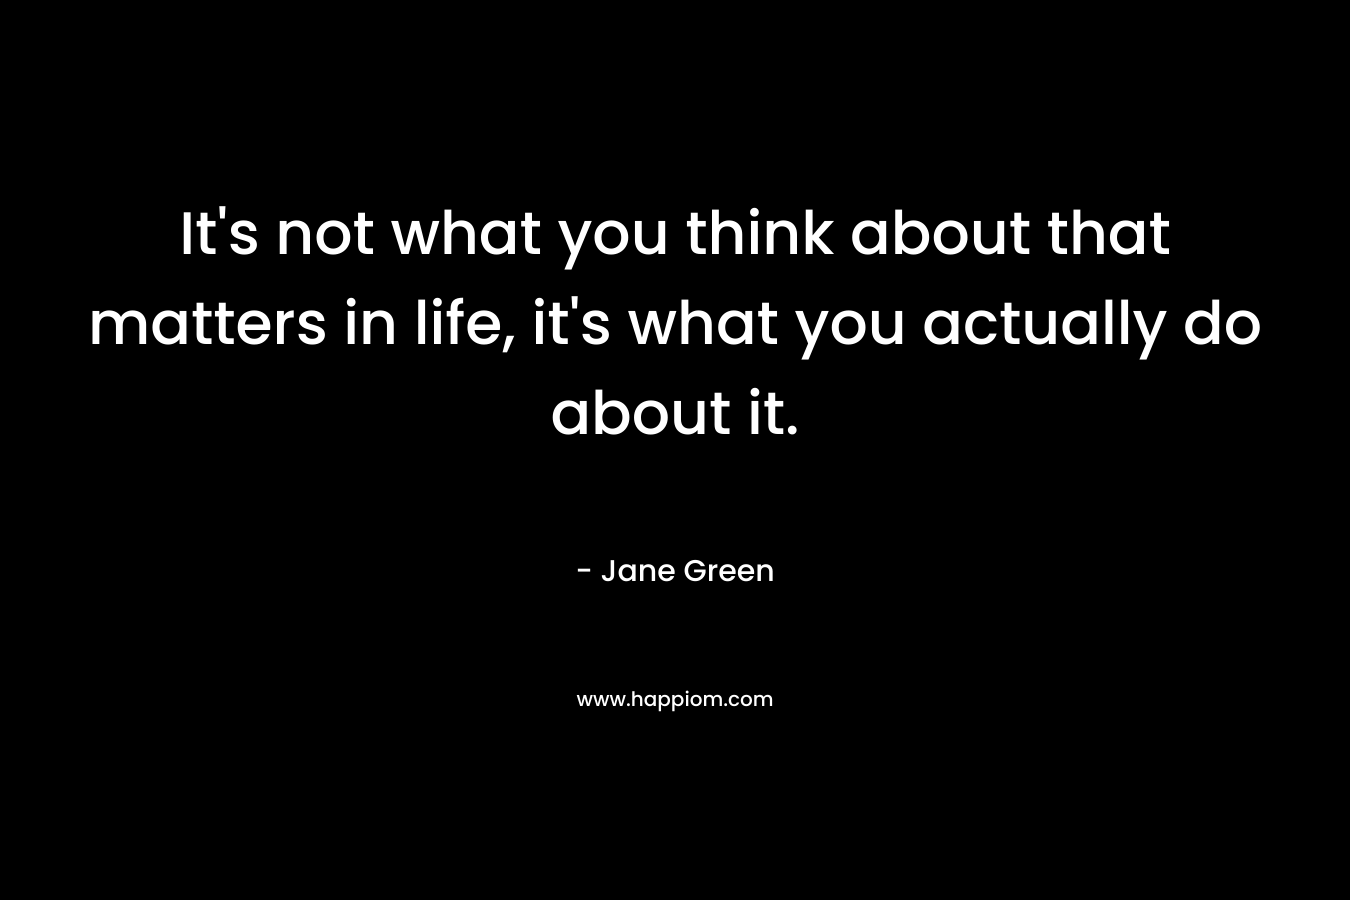 It's not what you think about that matters in life, it's what you actually do about it.